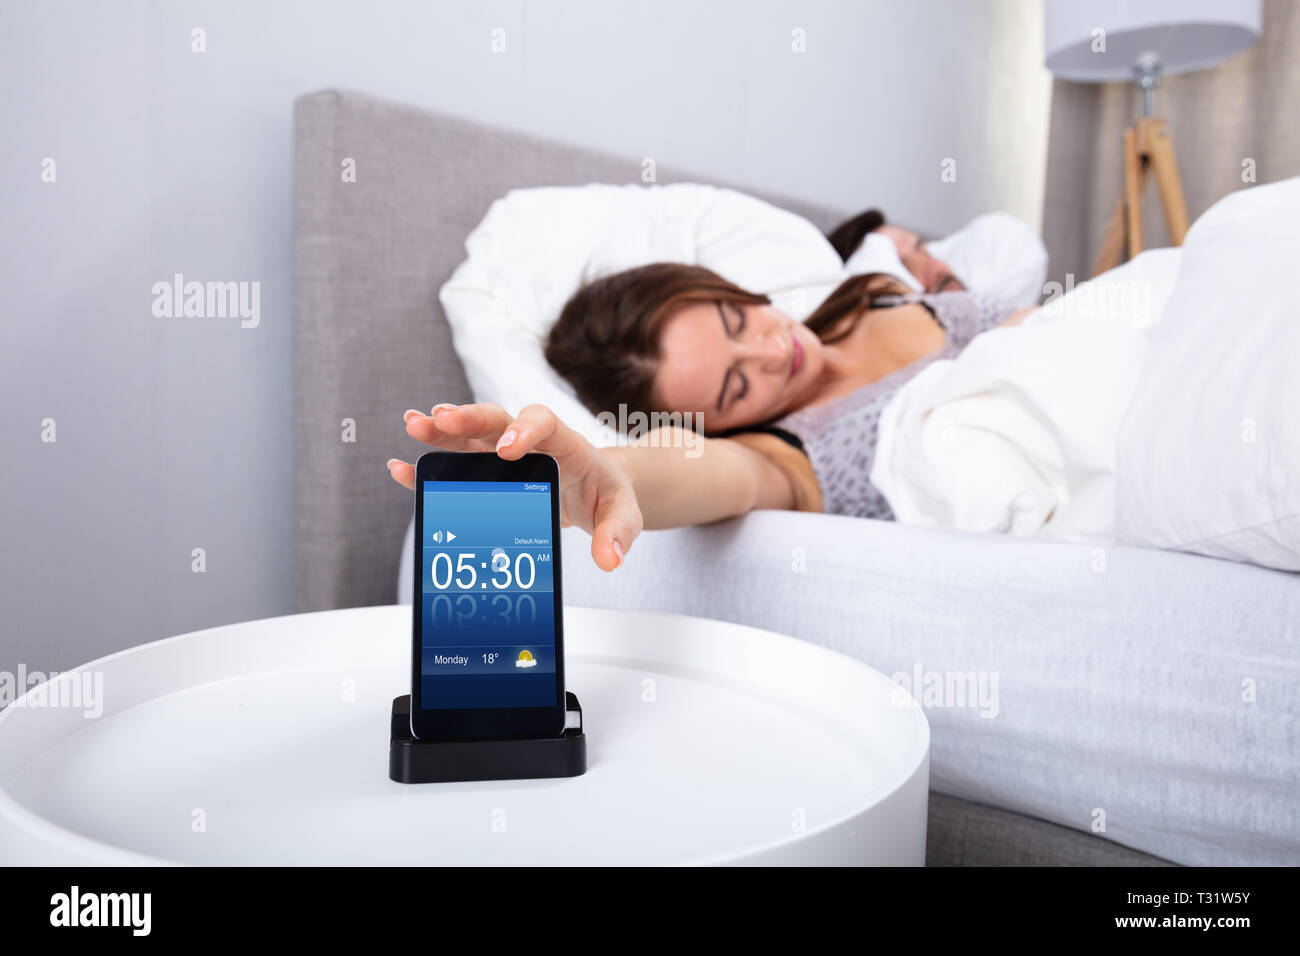 Young Woman Sleeping Near Alarm Set On Mobile Phone In Bedroom Stock Photo